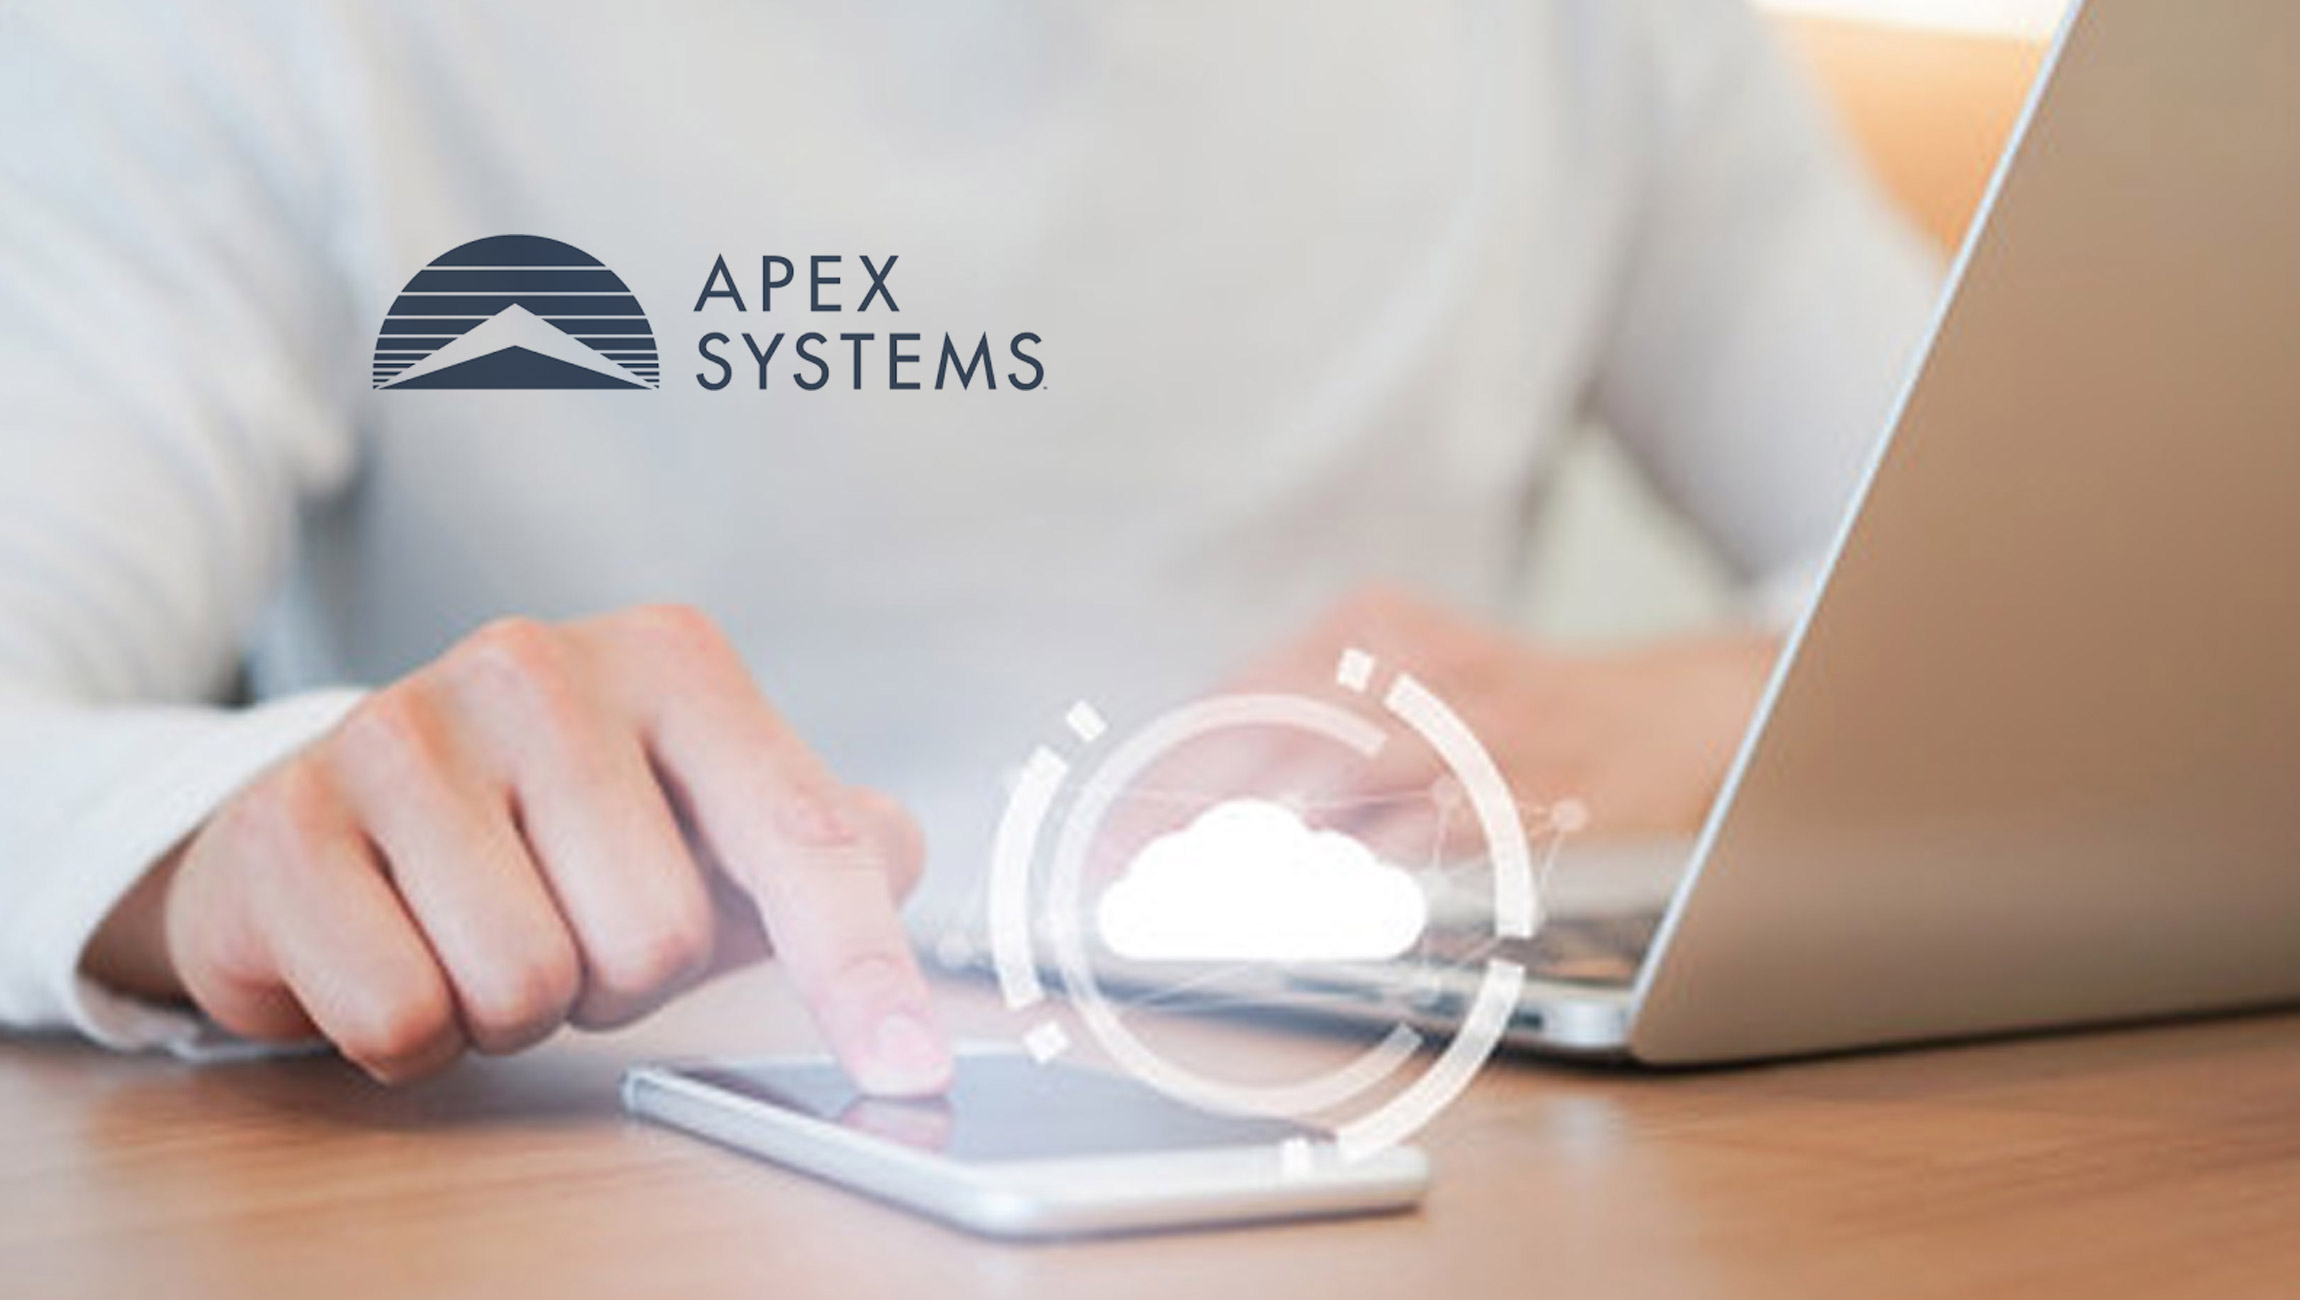 Apex-Systems’-Cloud-Excellence-Rewarded-by-Being-Named-AWS-Advanced-Consulting-Partner-by-Amazon-Web-Services